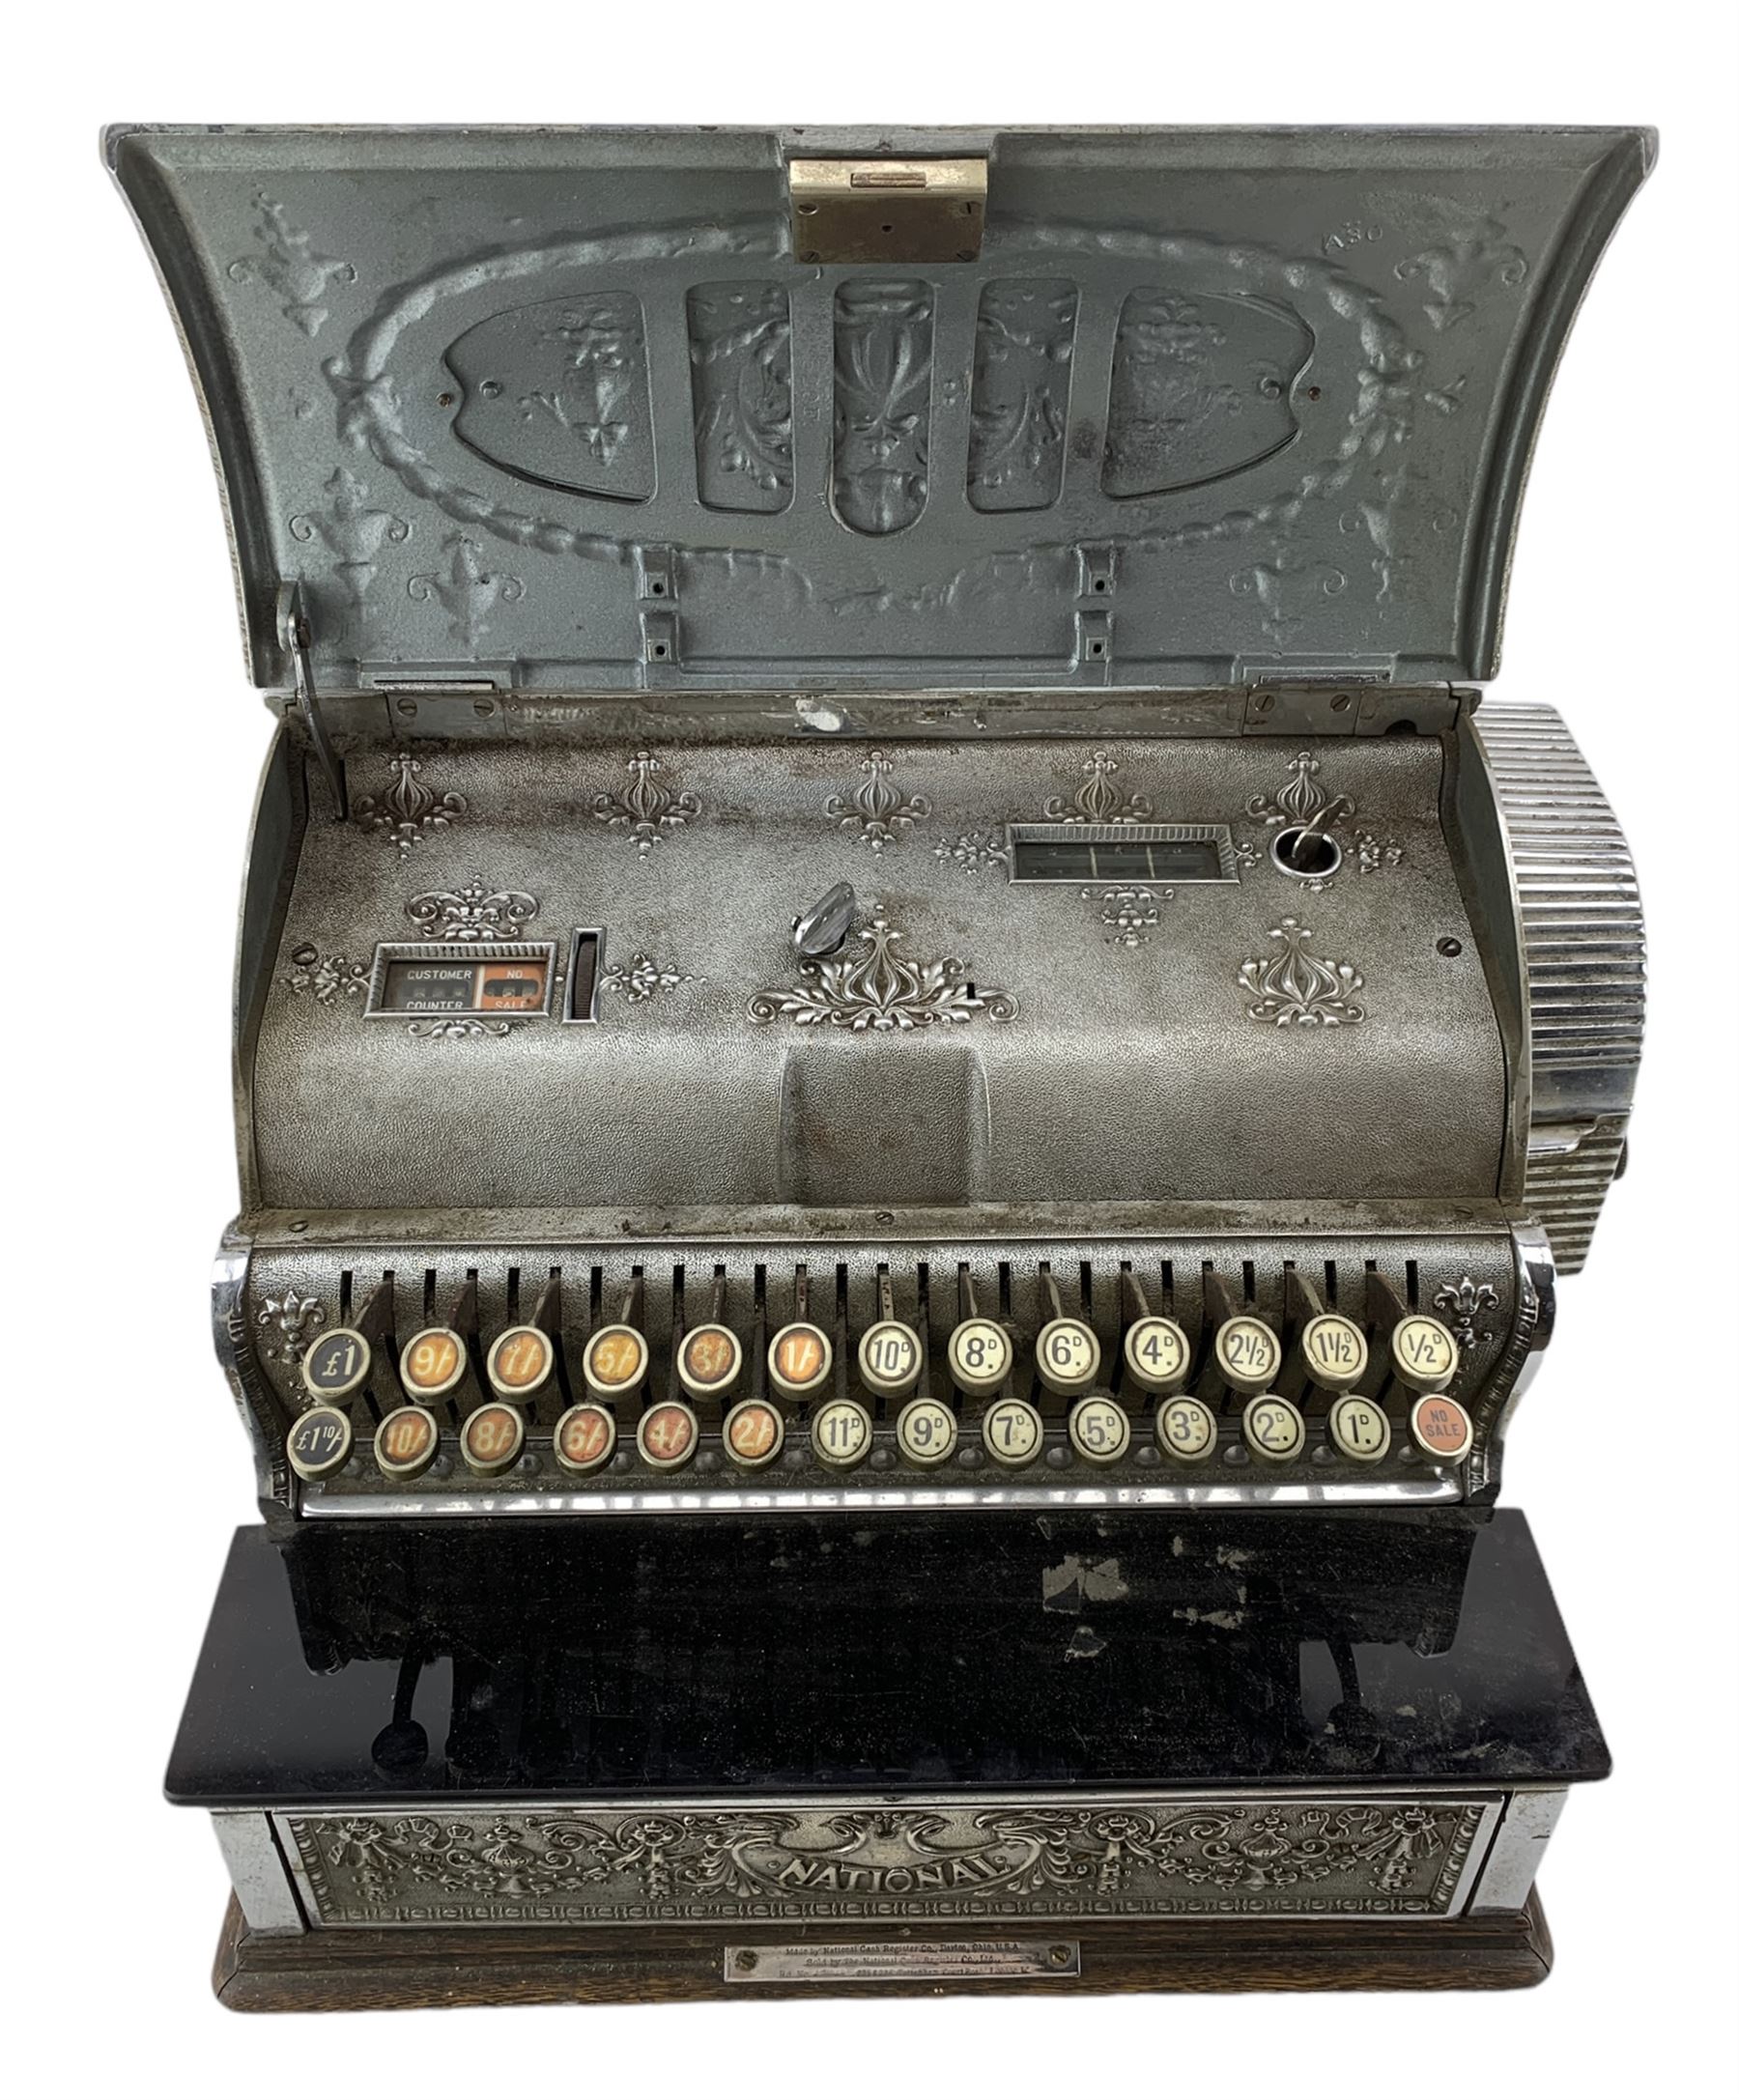 Early 20th century National Cash Register by the National Cash Register Co. - Image 3 of 5